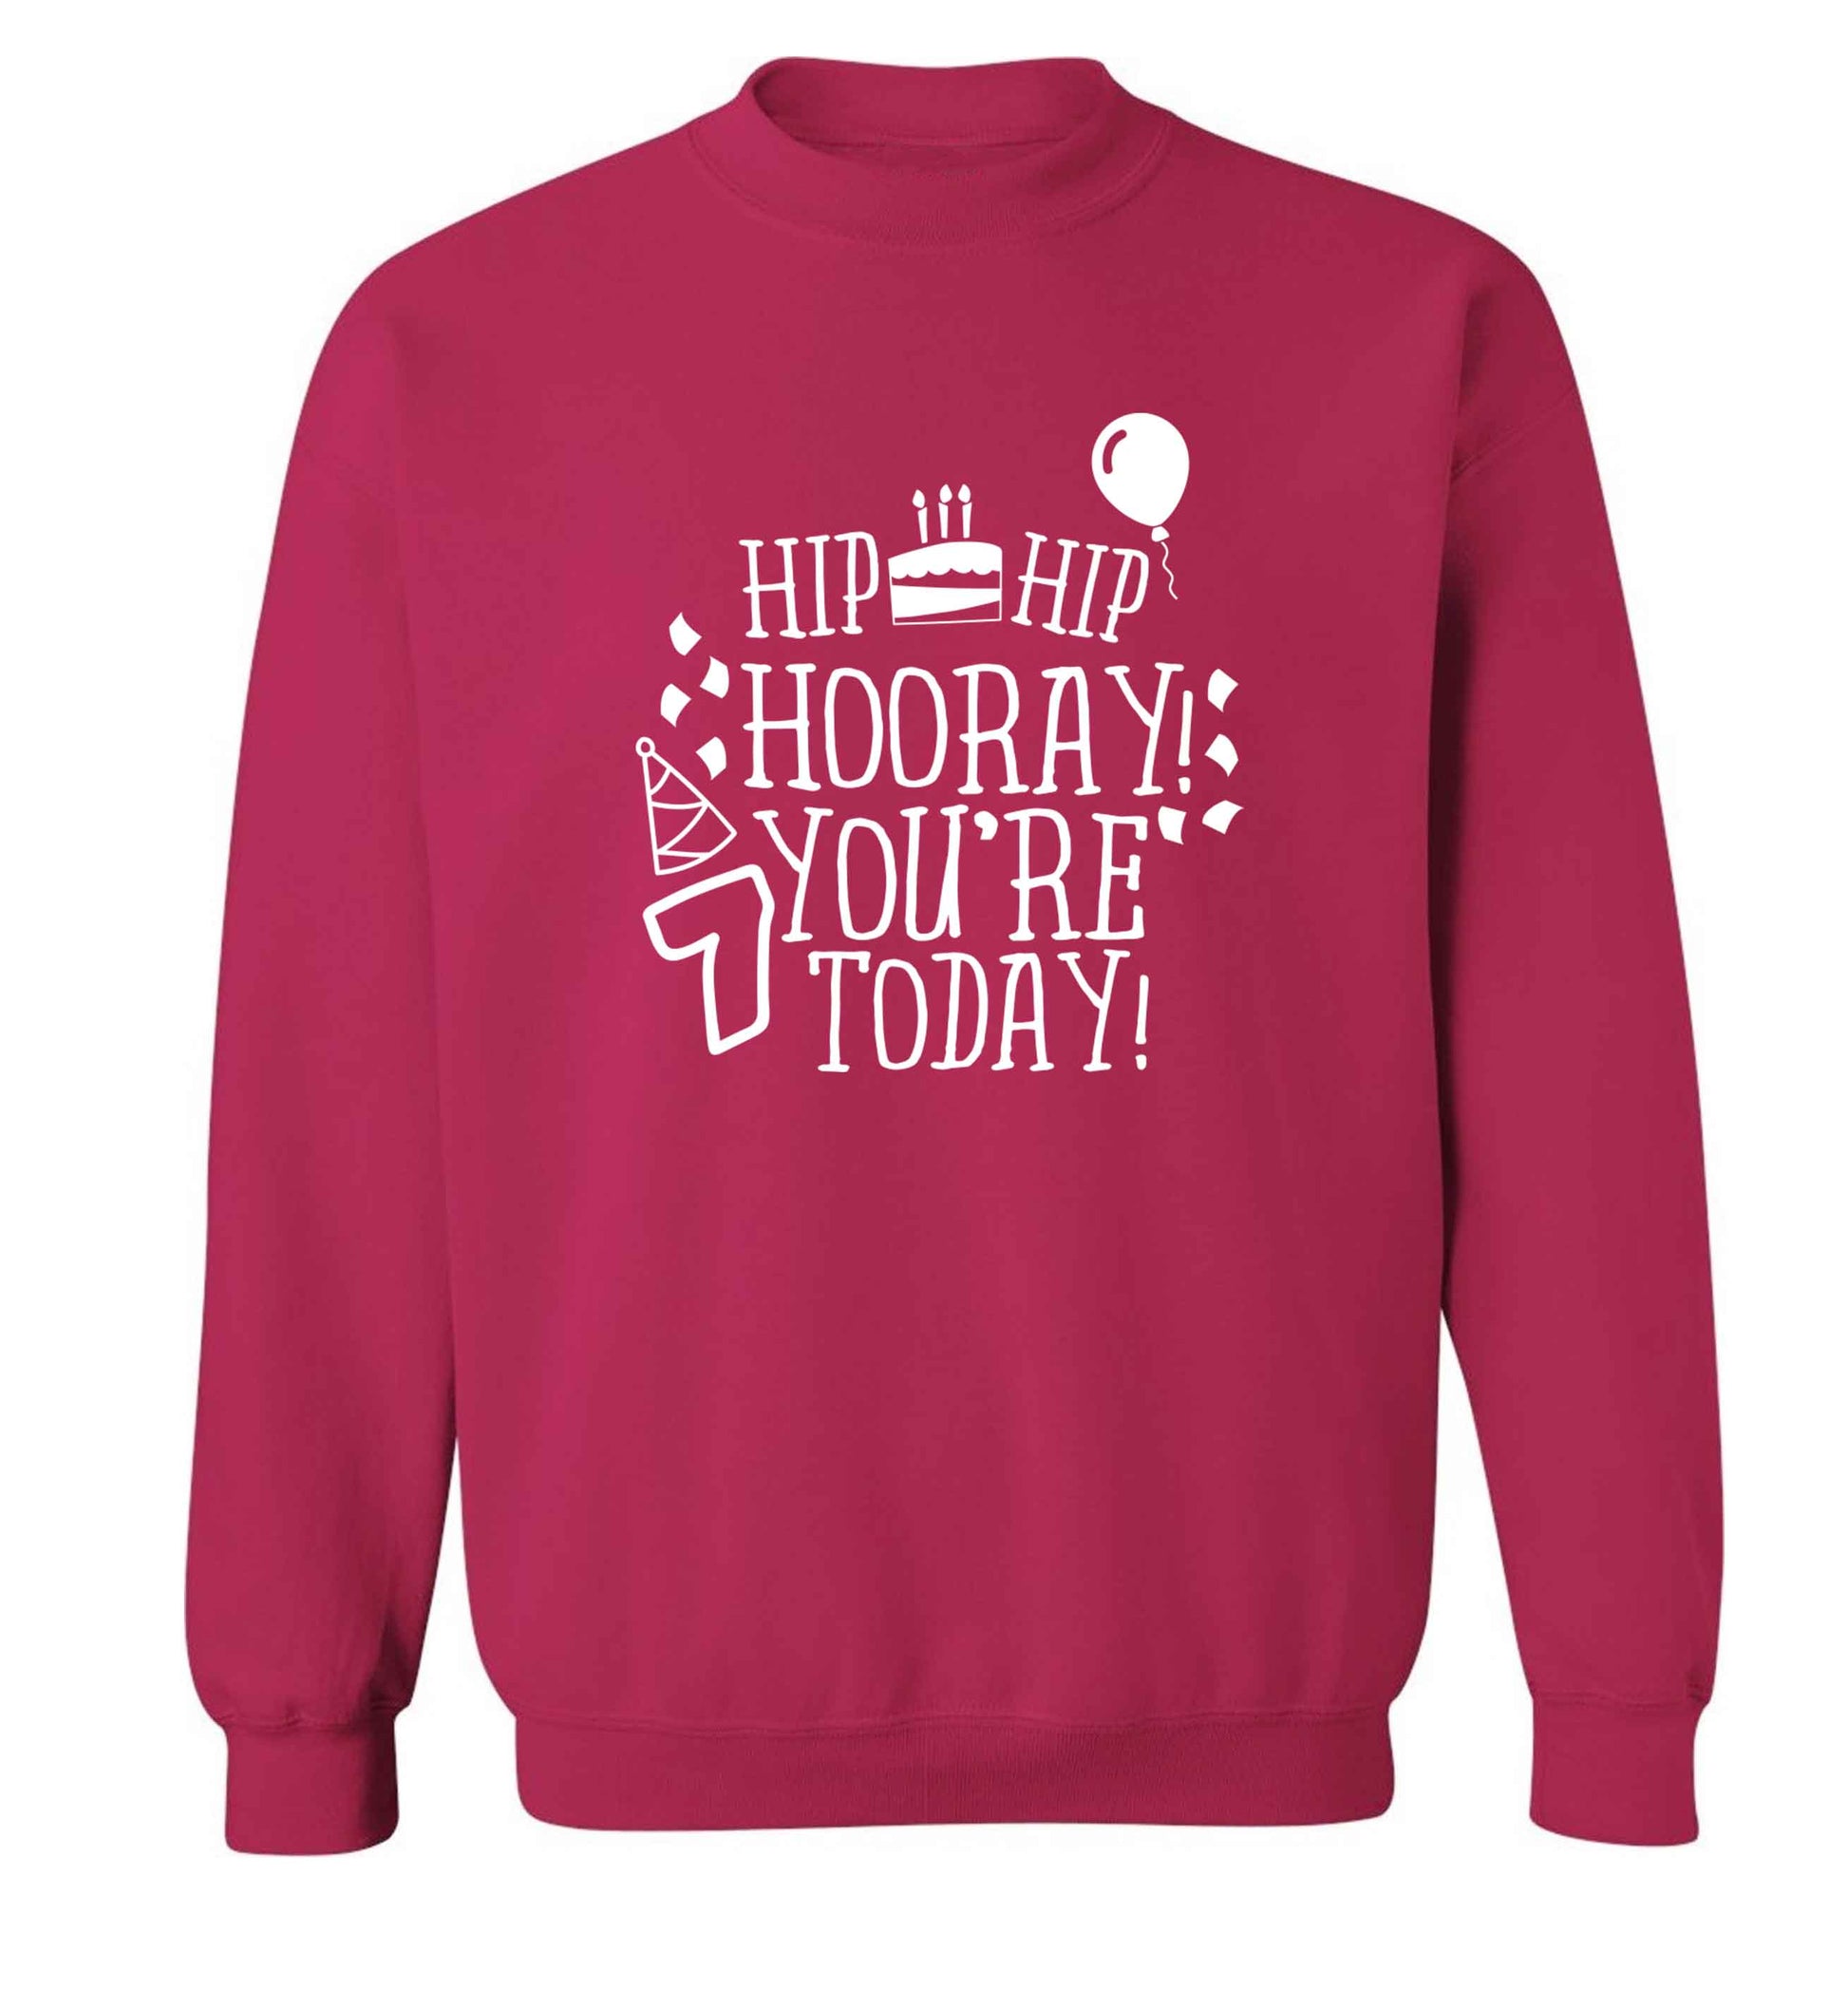 Hip hip hooray you're seven today! adult's unisex pink sweater 2XL